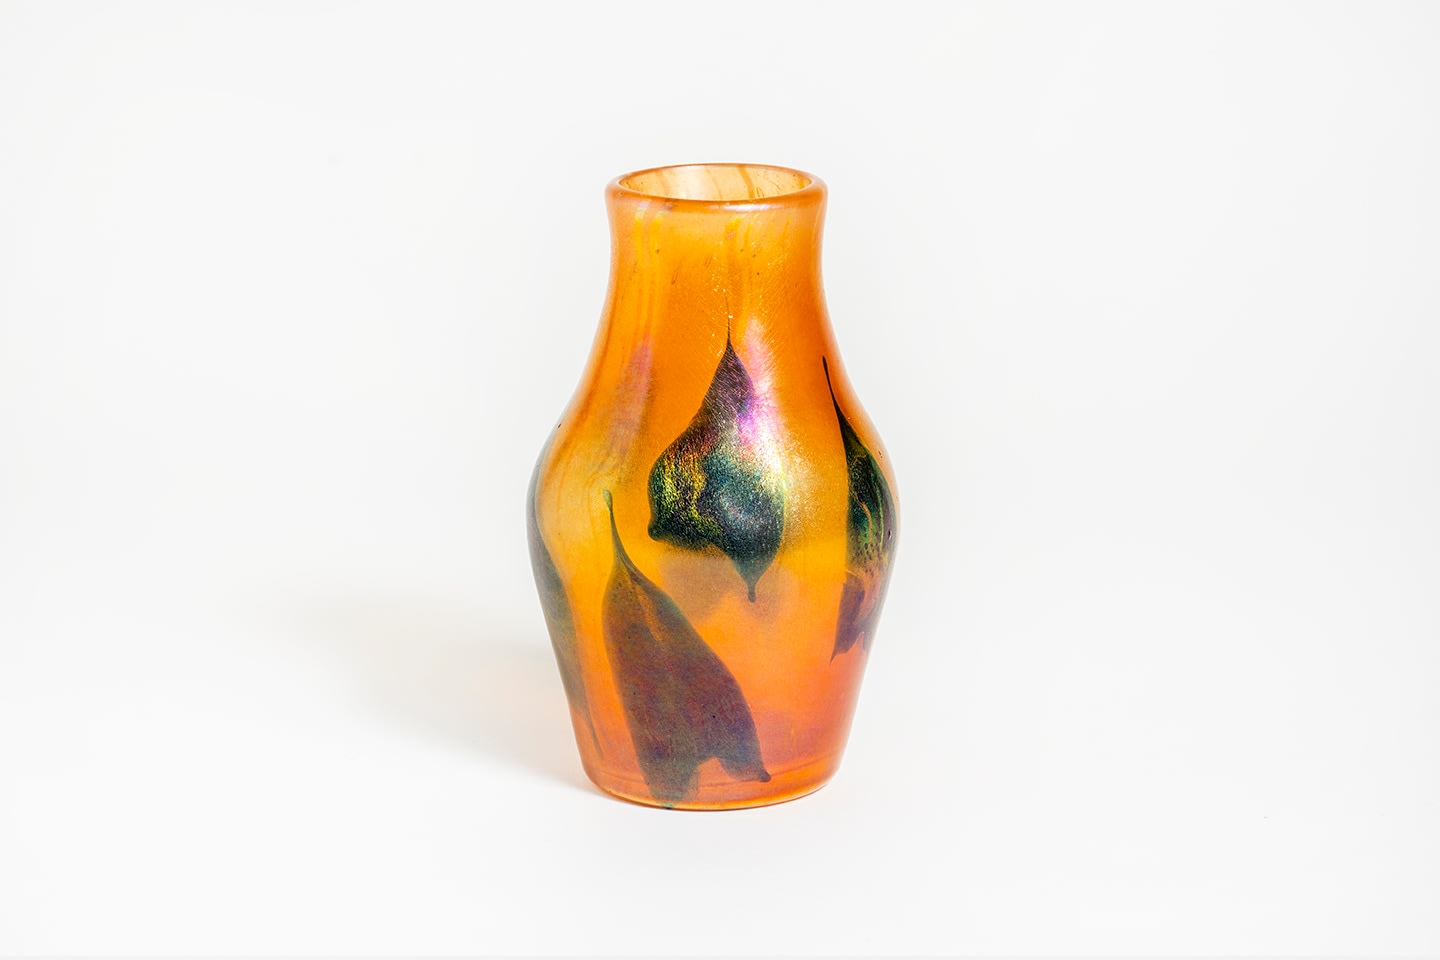 an orange translucent vase with decoration on the surface of abstracted trilobed pointed arrowhead leaves, the leaves in a dark glass called Cypriote by Tiffany because of the irregular surface texture and rainbow iridescence which imitated ancient glass